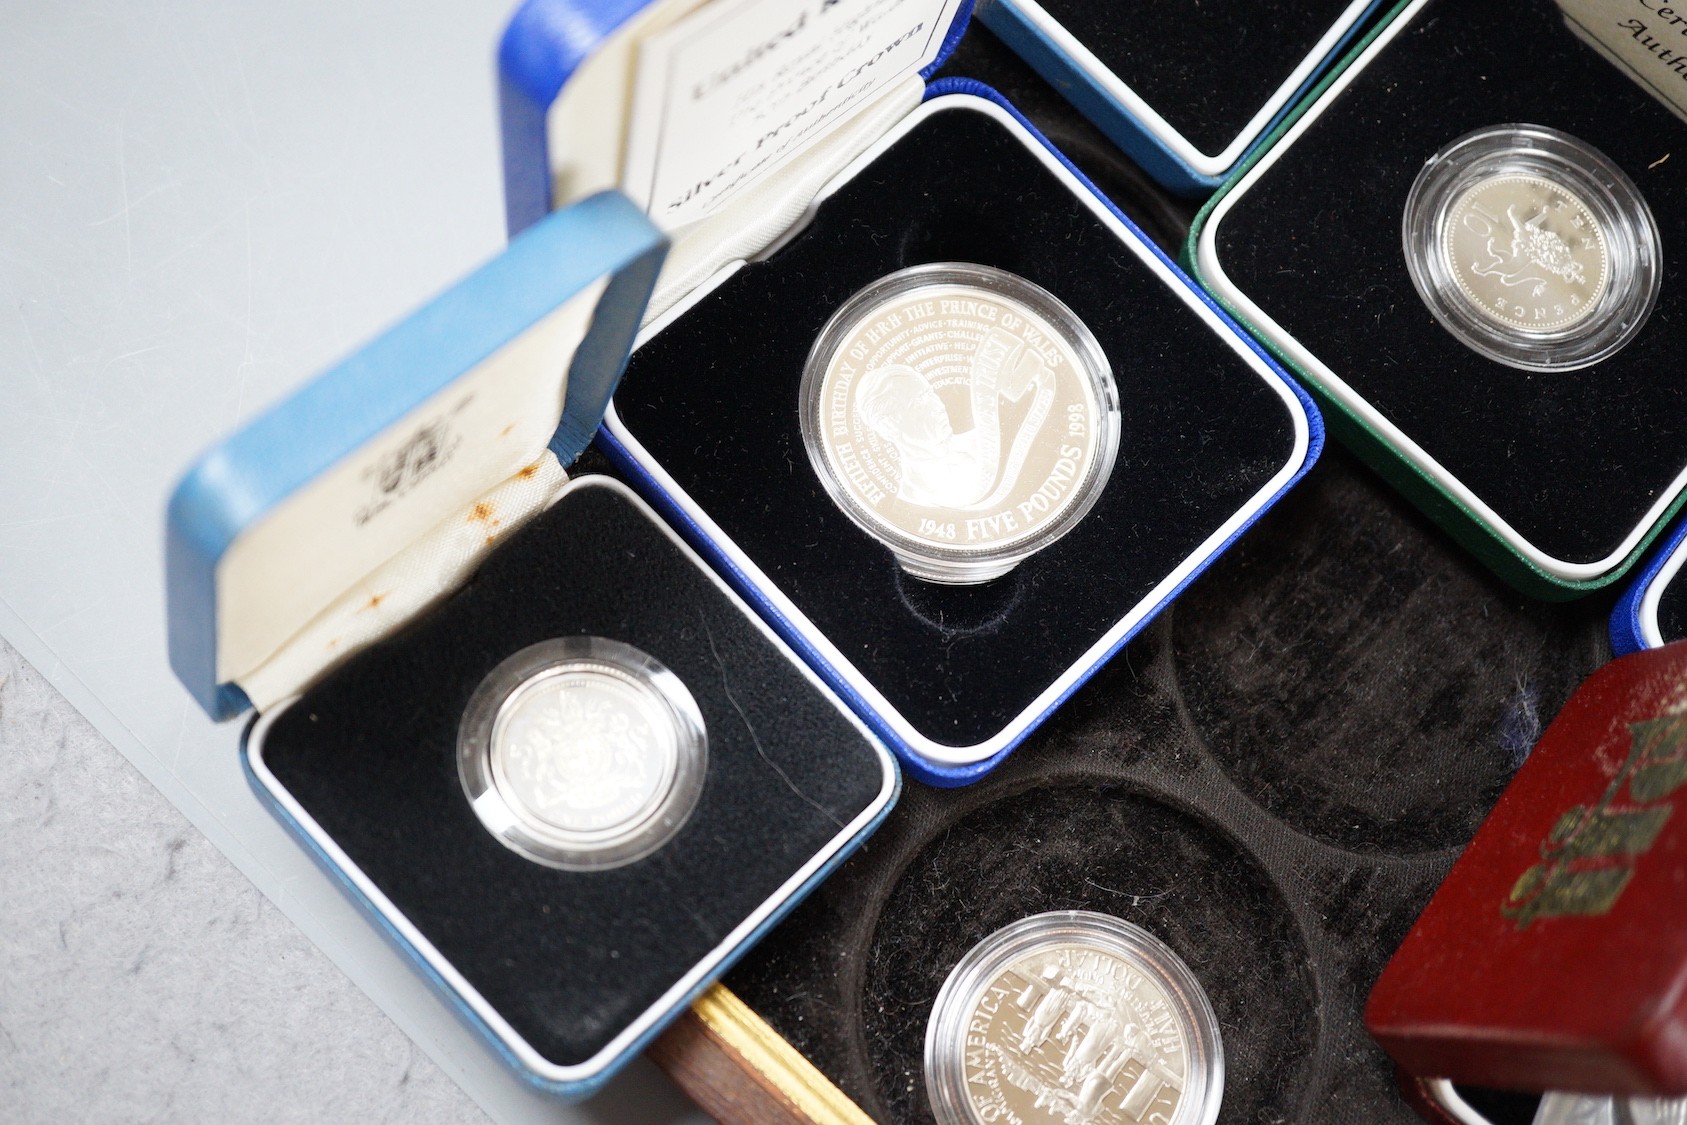 Royal mint UK silver proof coins, to include 1998 crown, 1983 £1, 1986 £1,1992 piedfort 10p coin, 2000 millennium £5, 1997 memory of Diana Princess of Wales £5 and 1981 Prince of Wales and lady Diana spencer commemorativ